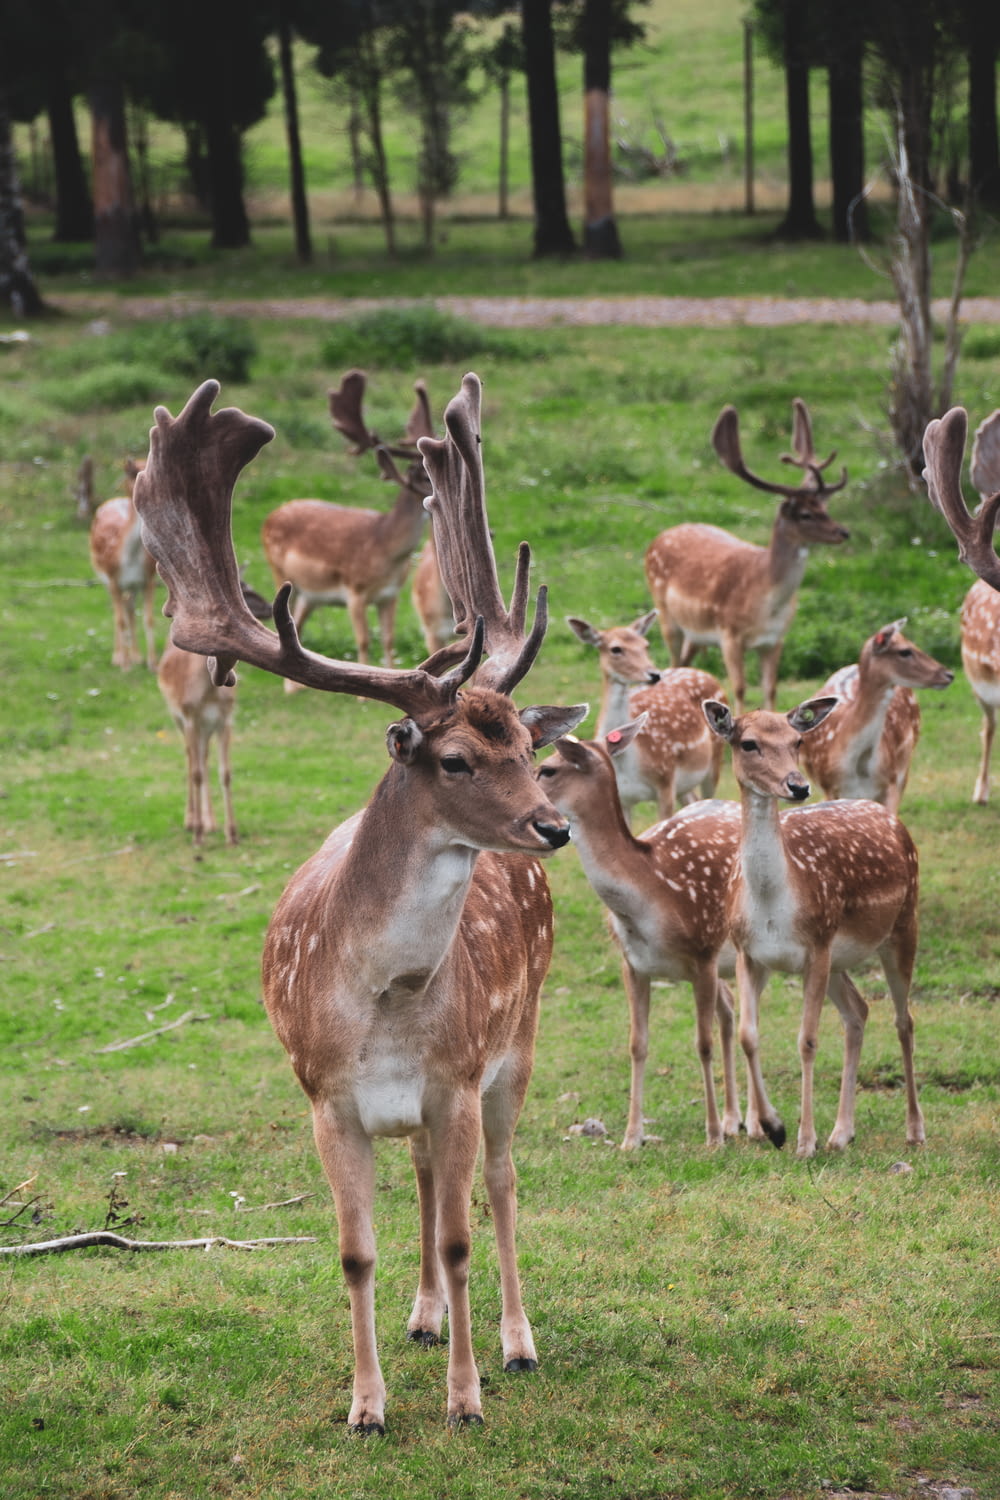 group of deer on green grass field during daytime